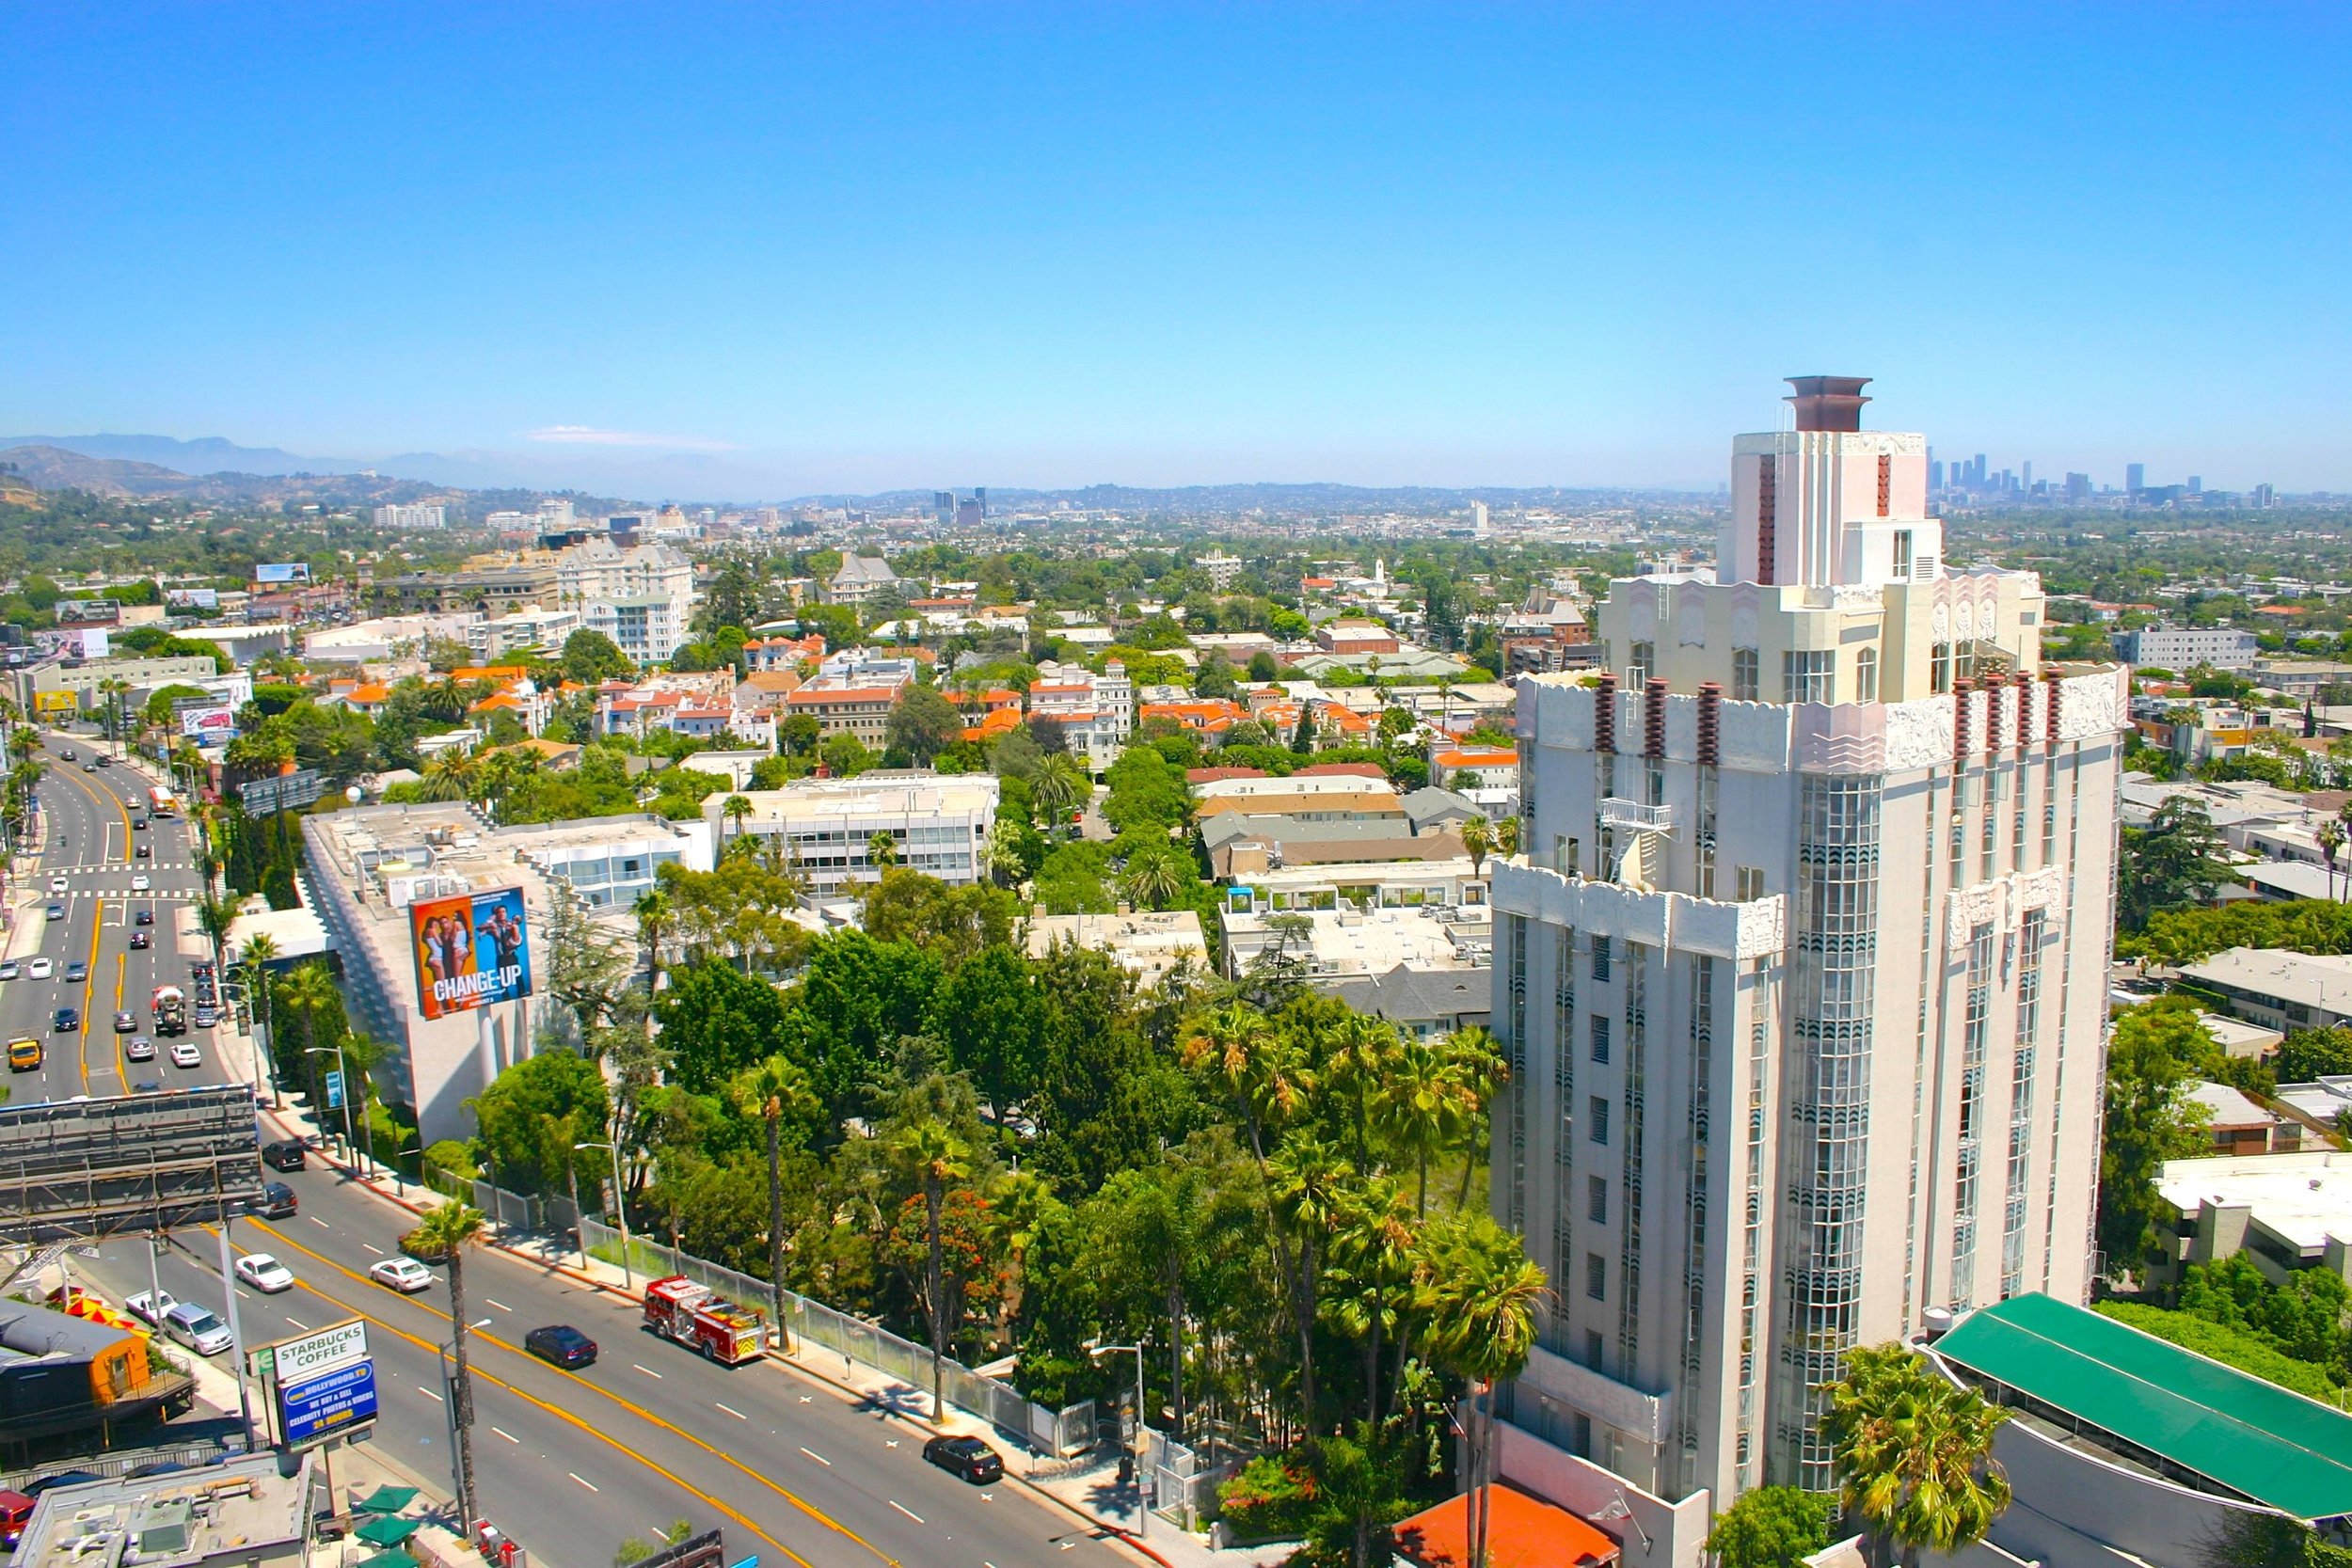 2. WeHo Tableau: The Sunset Tower Hotel in the heart of West Hollywood’s legendary “Sunset Strip”